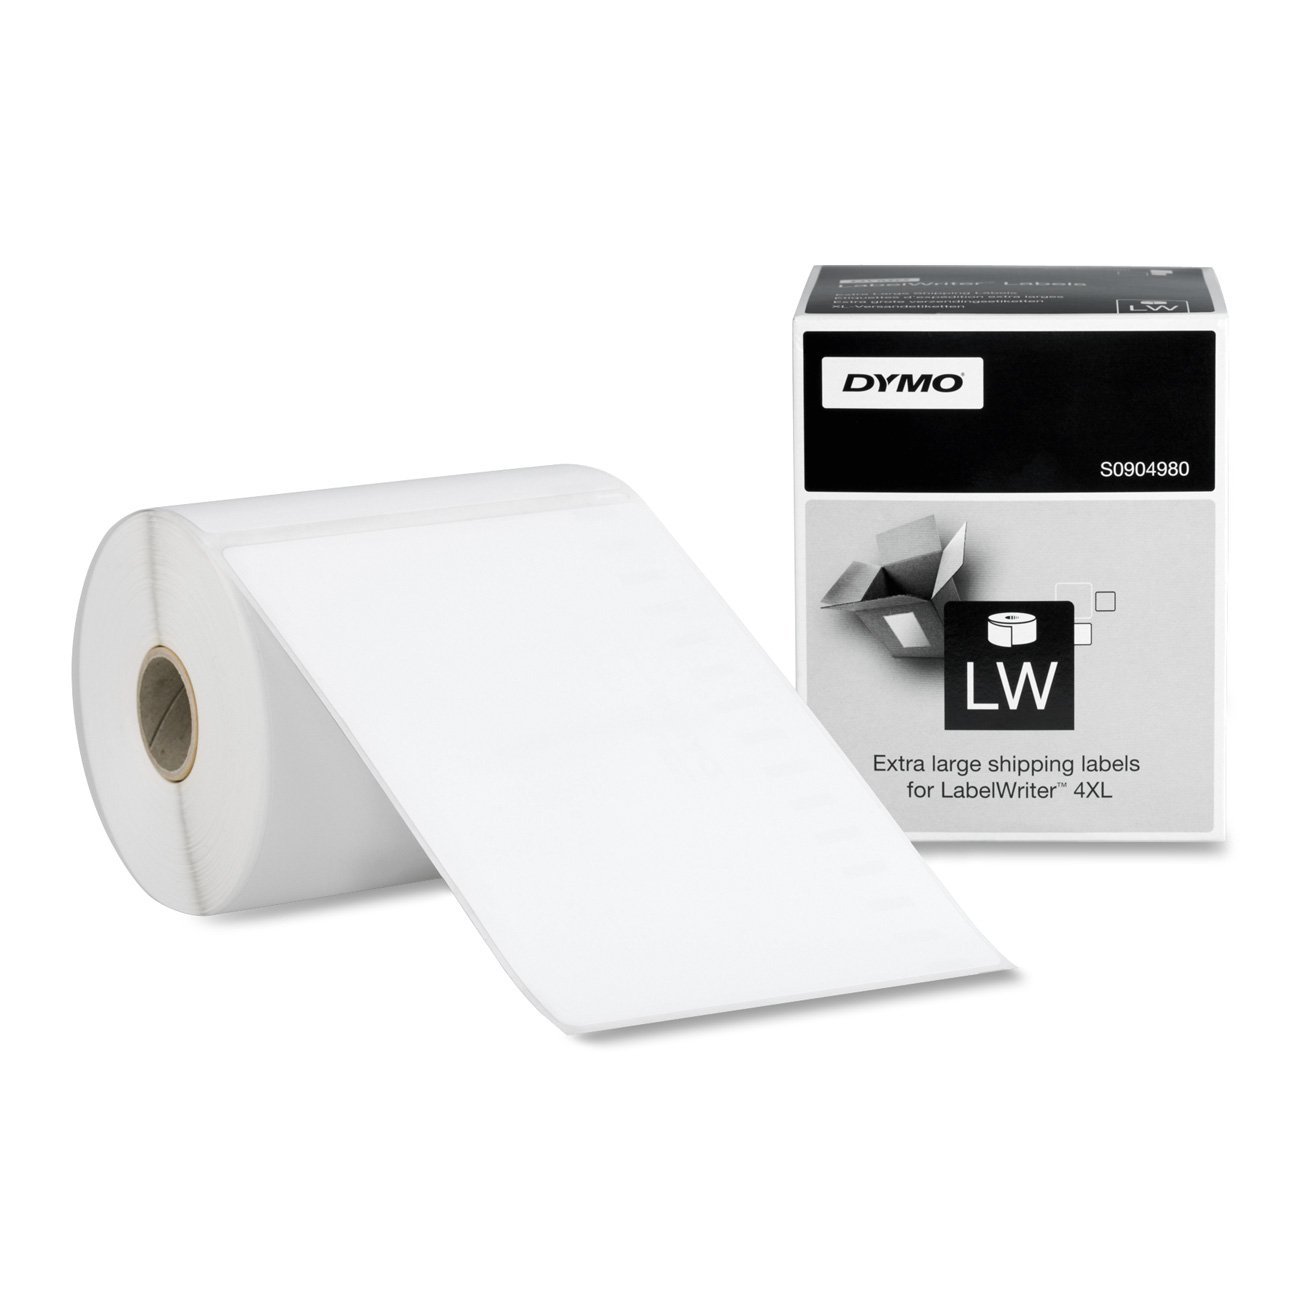 DYMO LabelWriter Shipping Labels, White, 4" x 6", 220 per pack